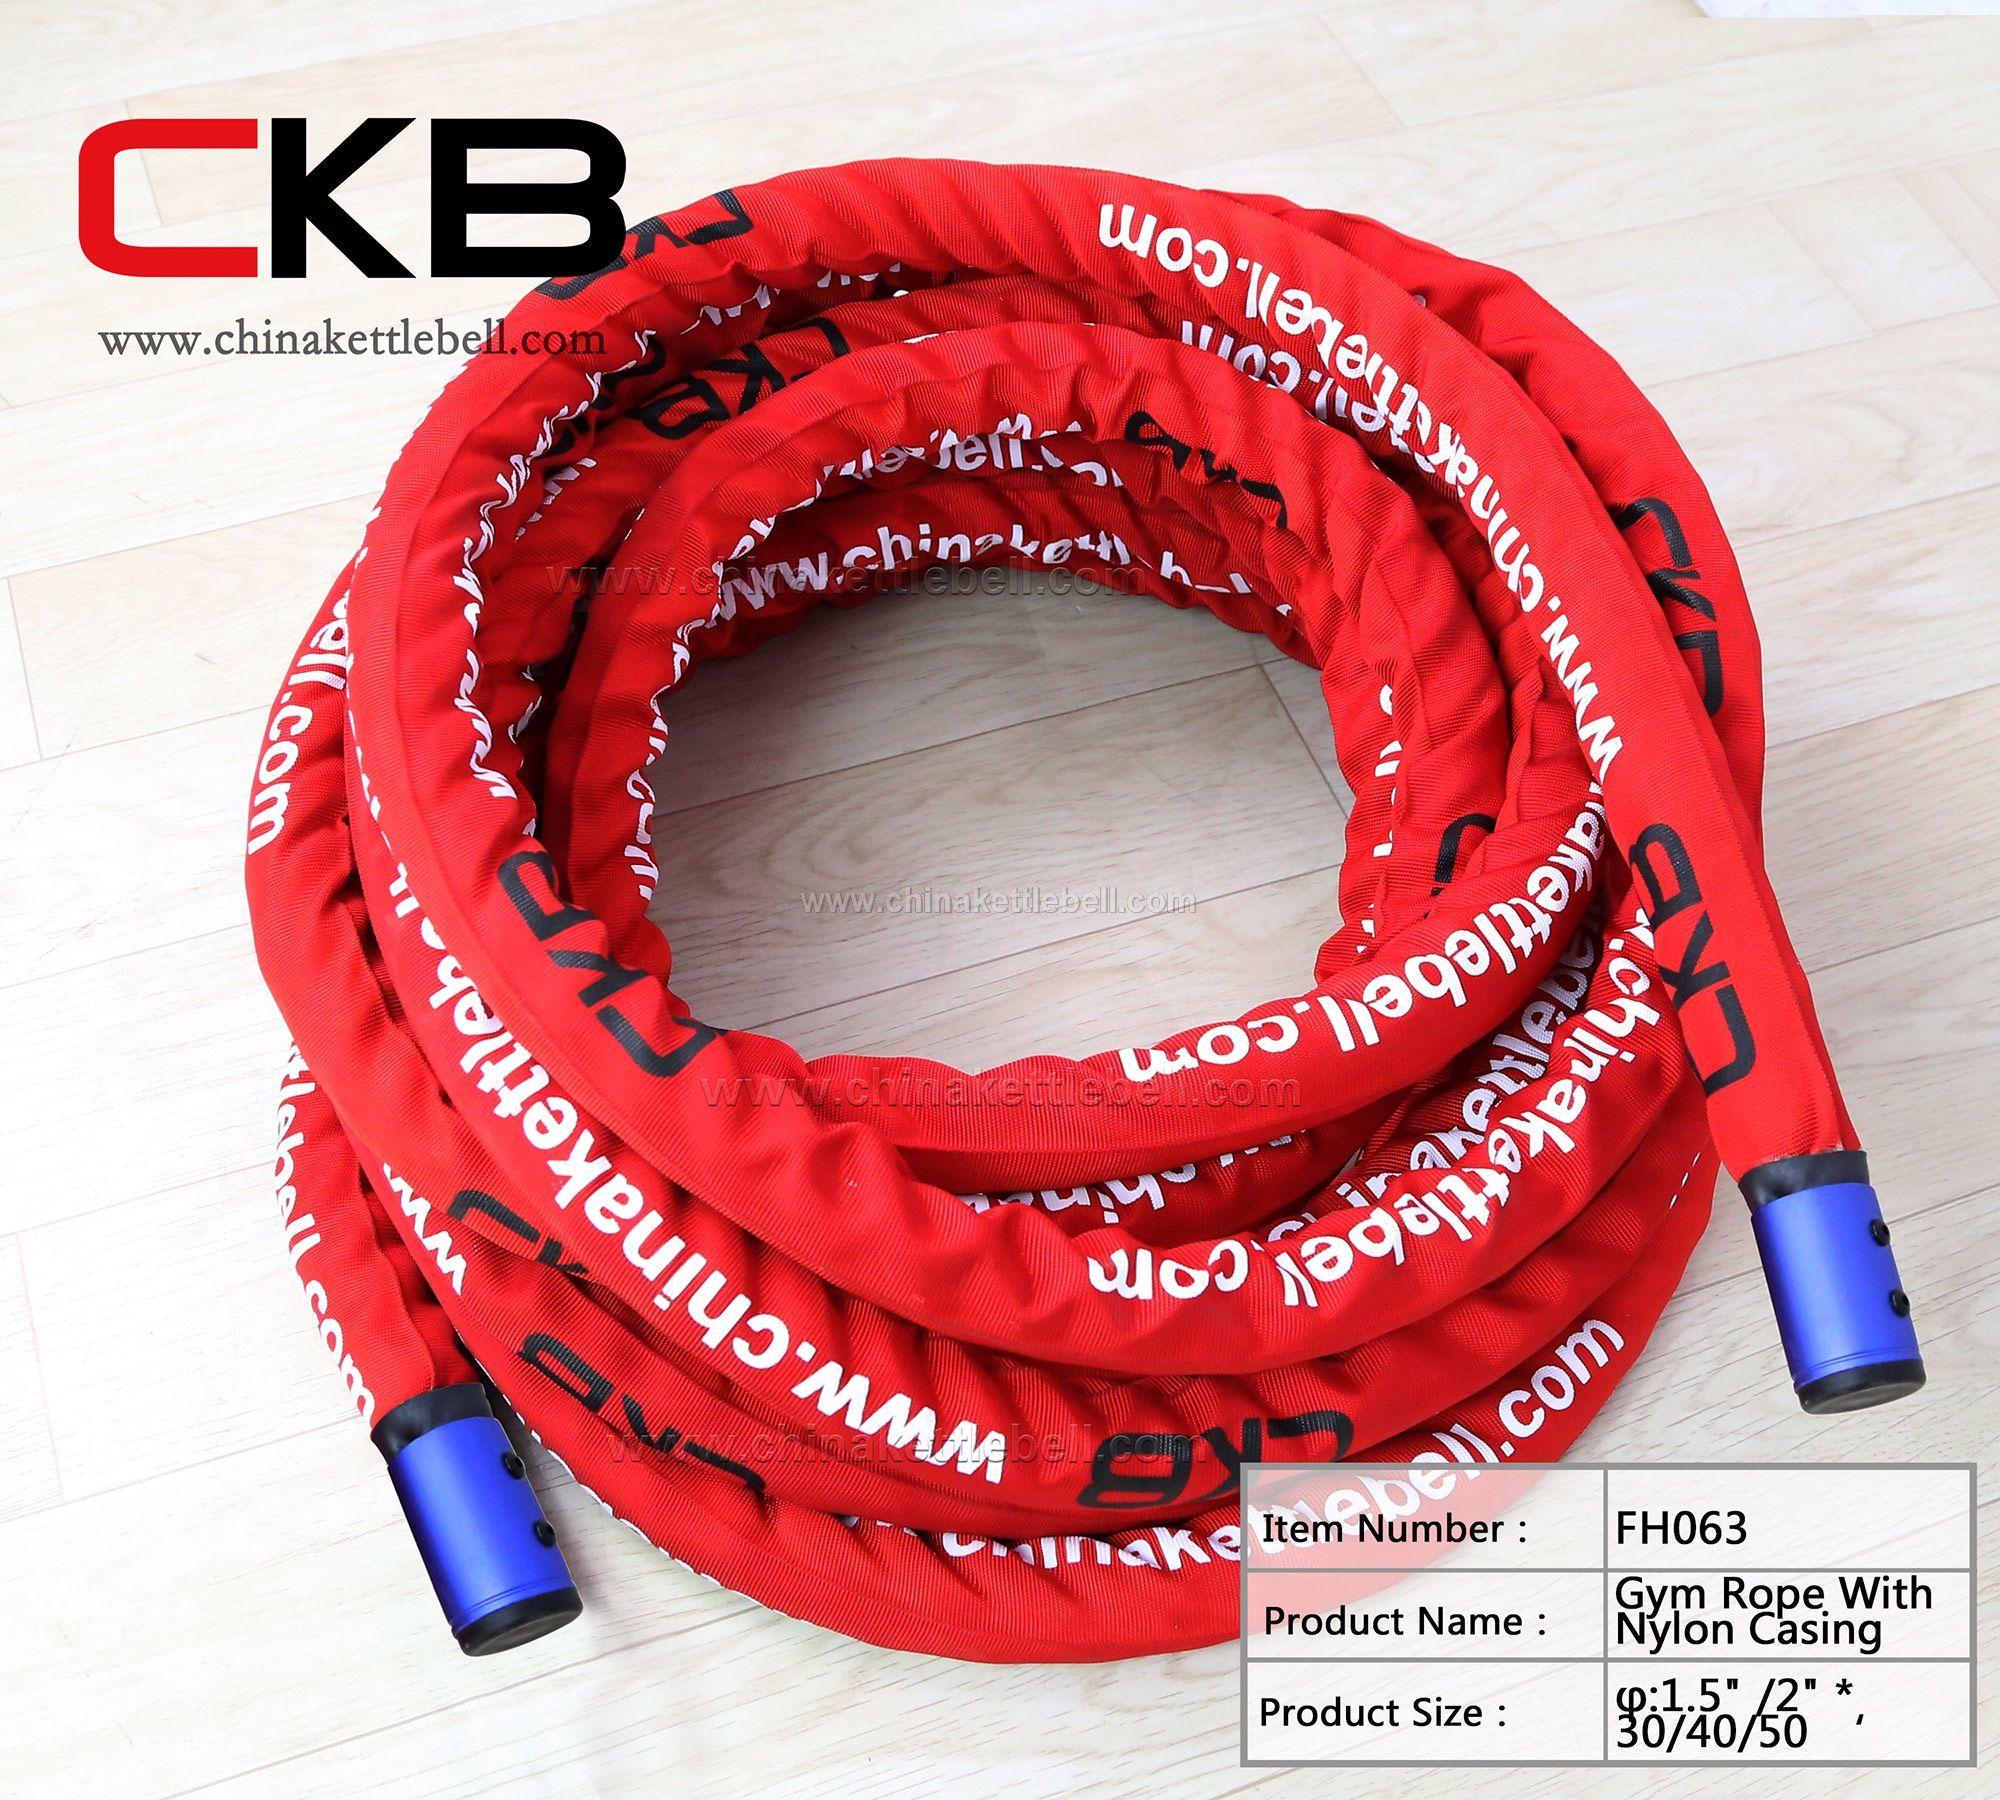 Gym rope with Nylon casing